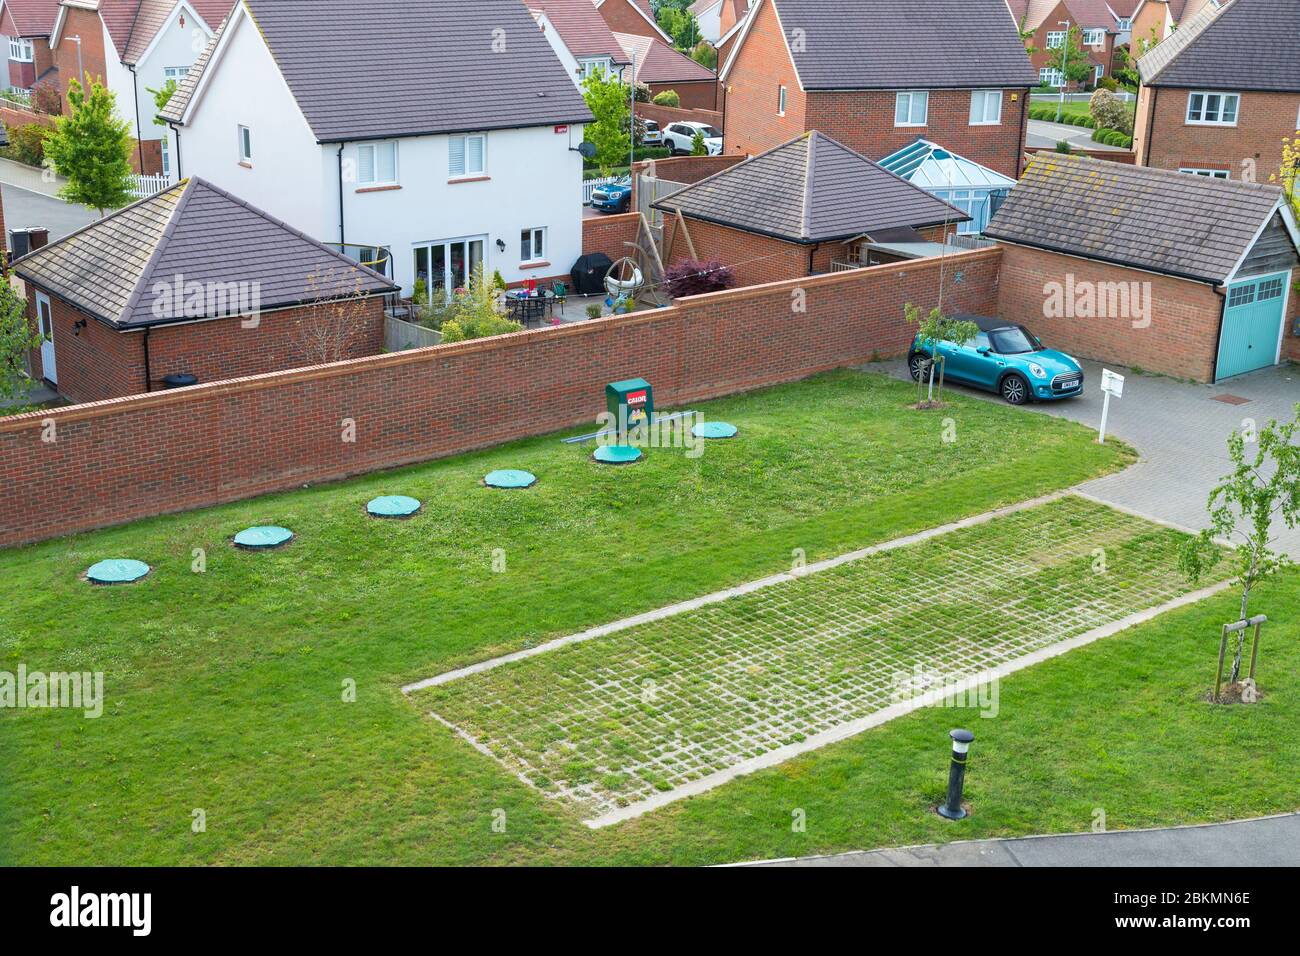 Calor propane gas tanks buried in the ground of a new housing estate with driveway for lorry, kent, uk Stock Photo